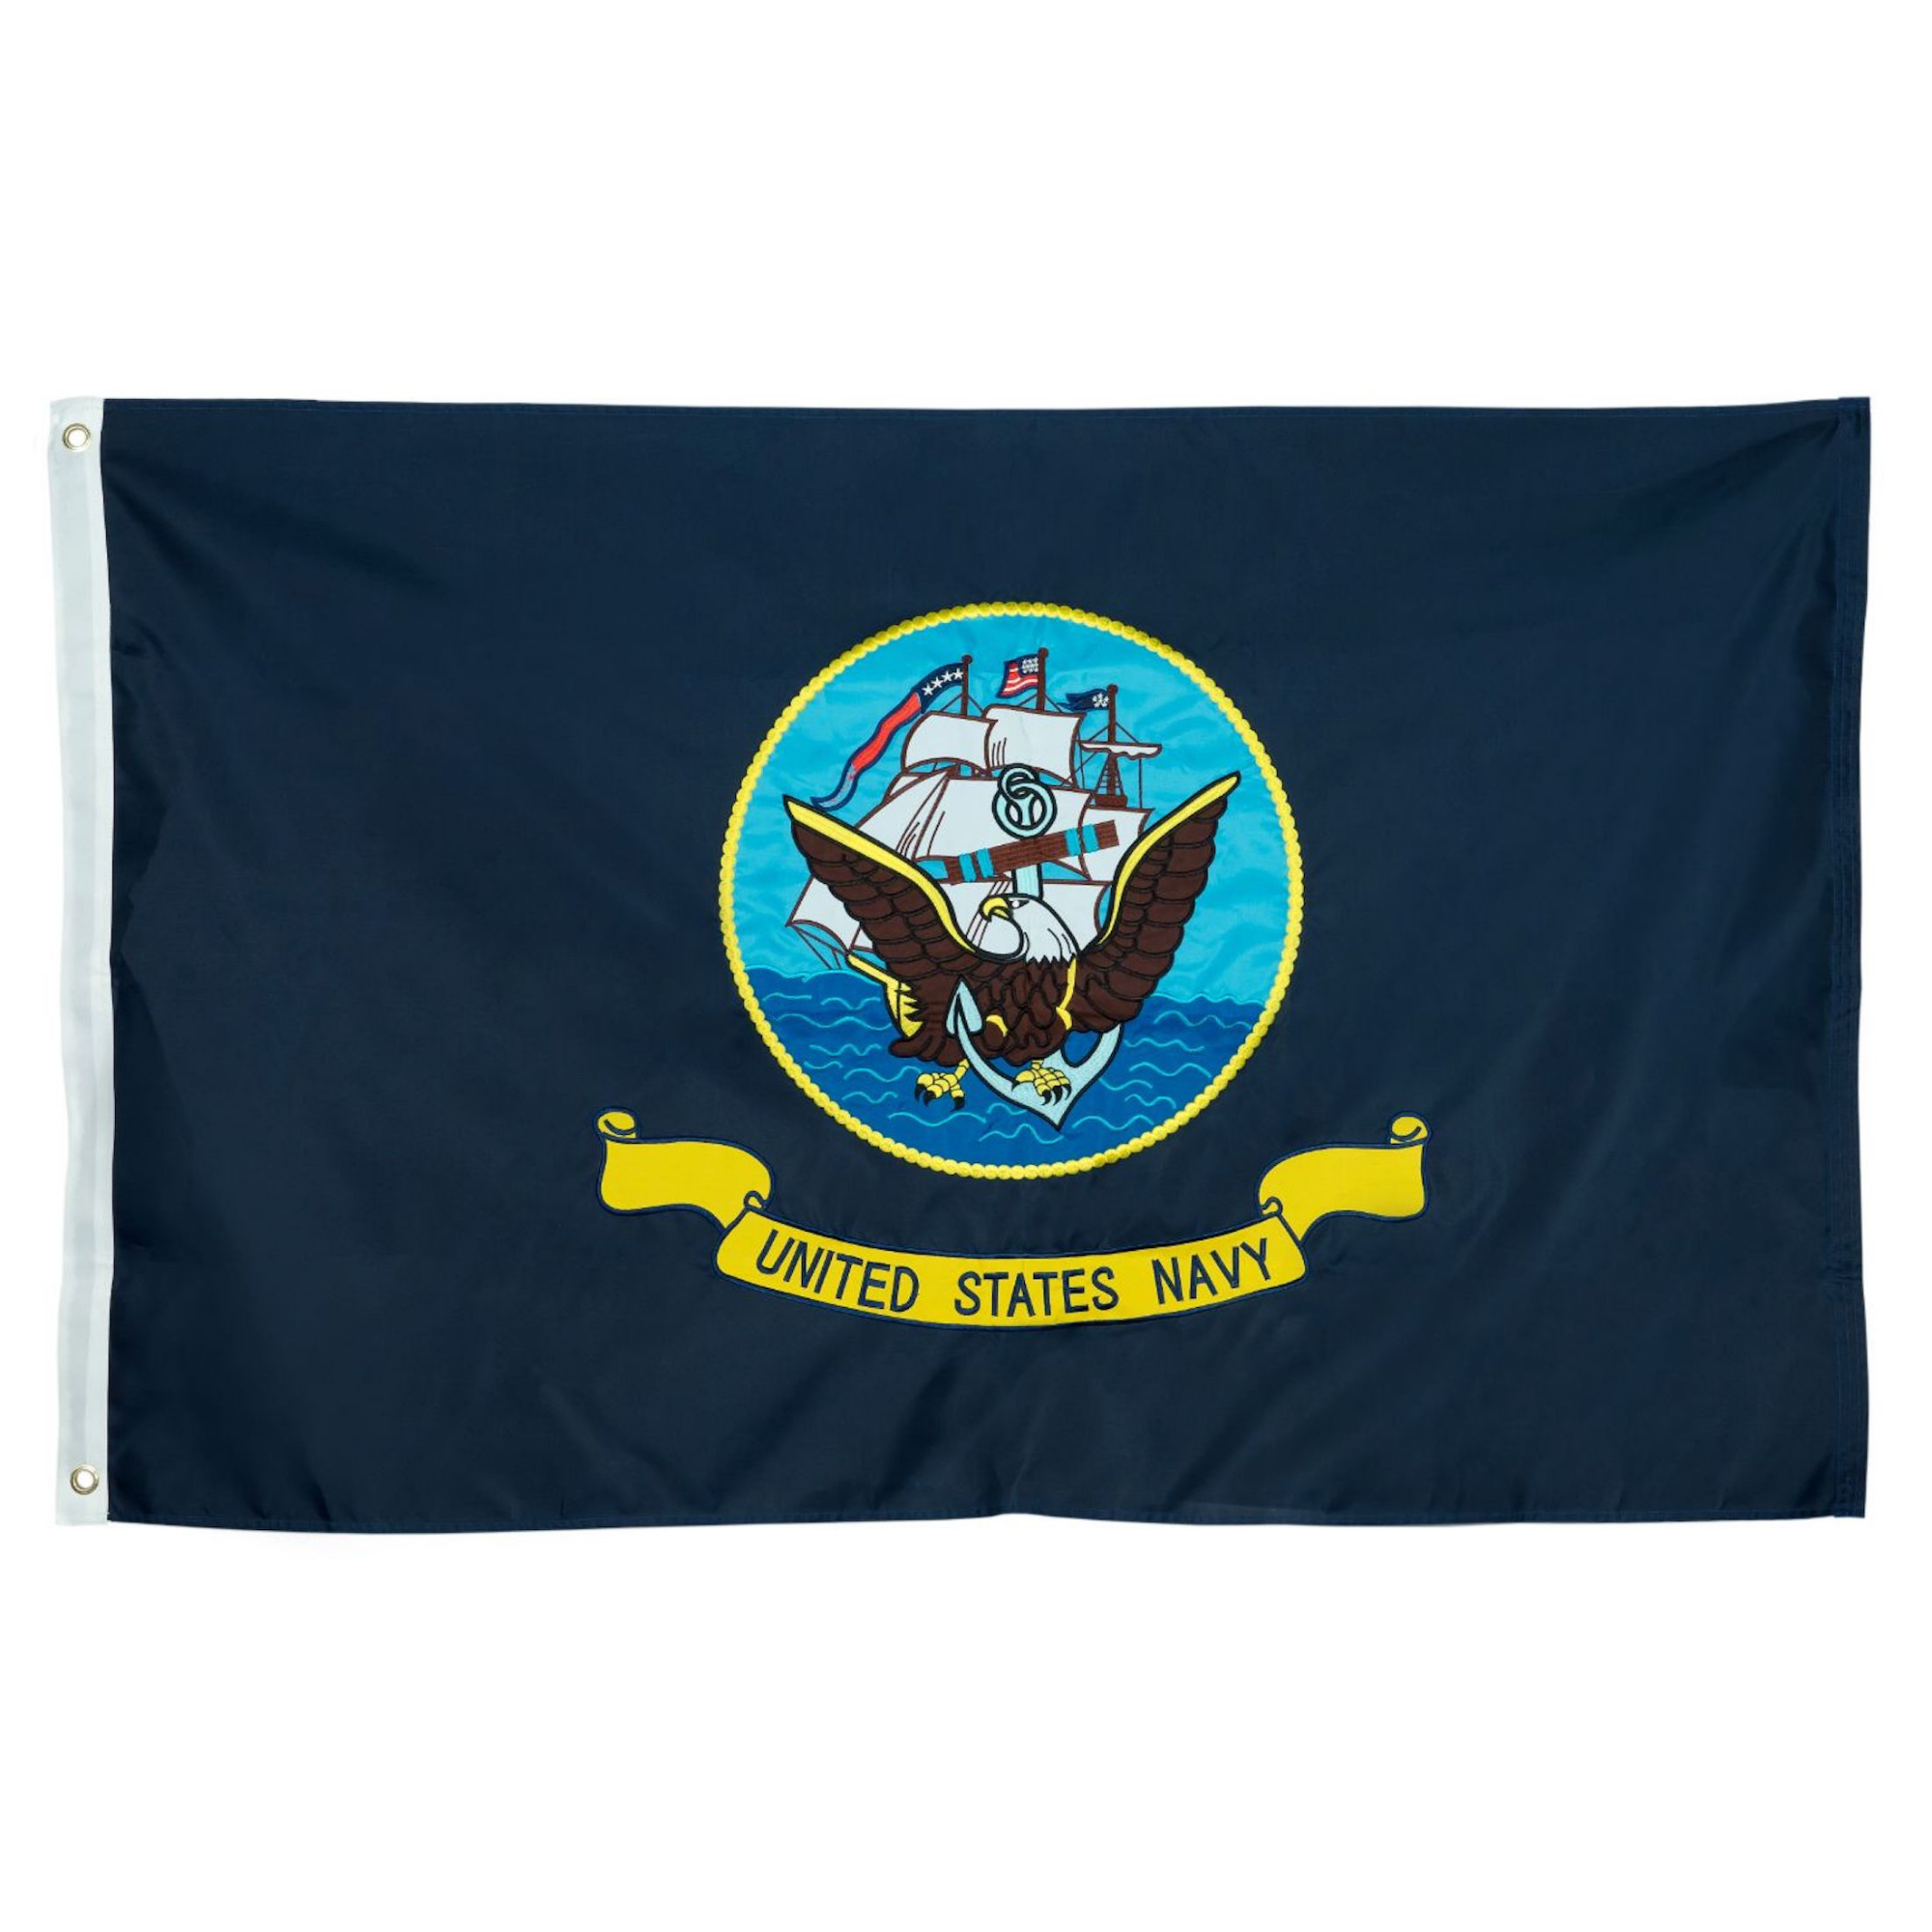 Fanmats U.S. Navy 3x5 High-Traffic Mat with Durable Rubber Backing - Portrait Orientation